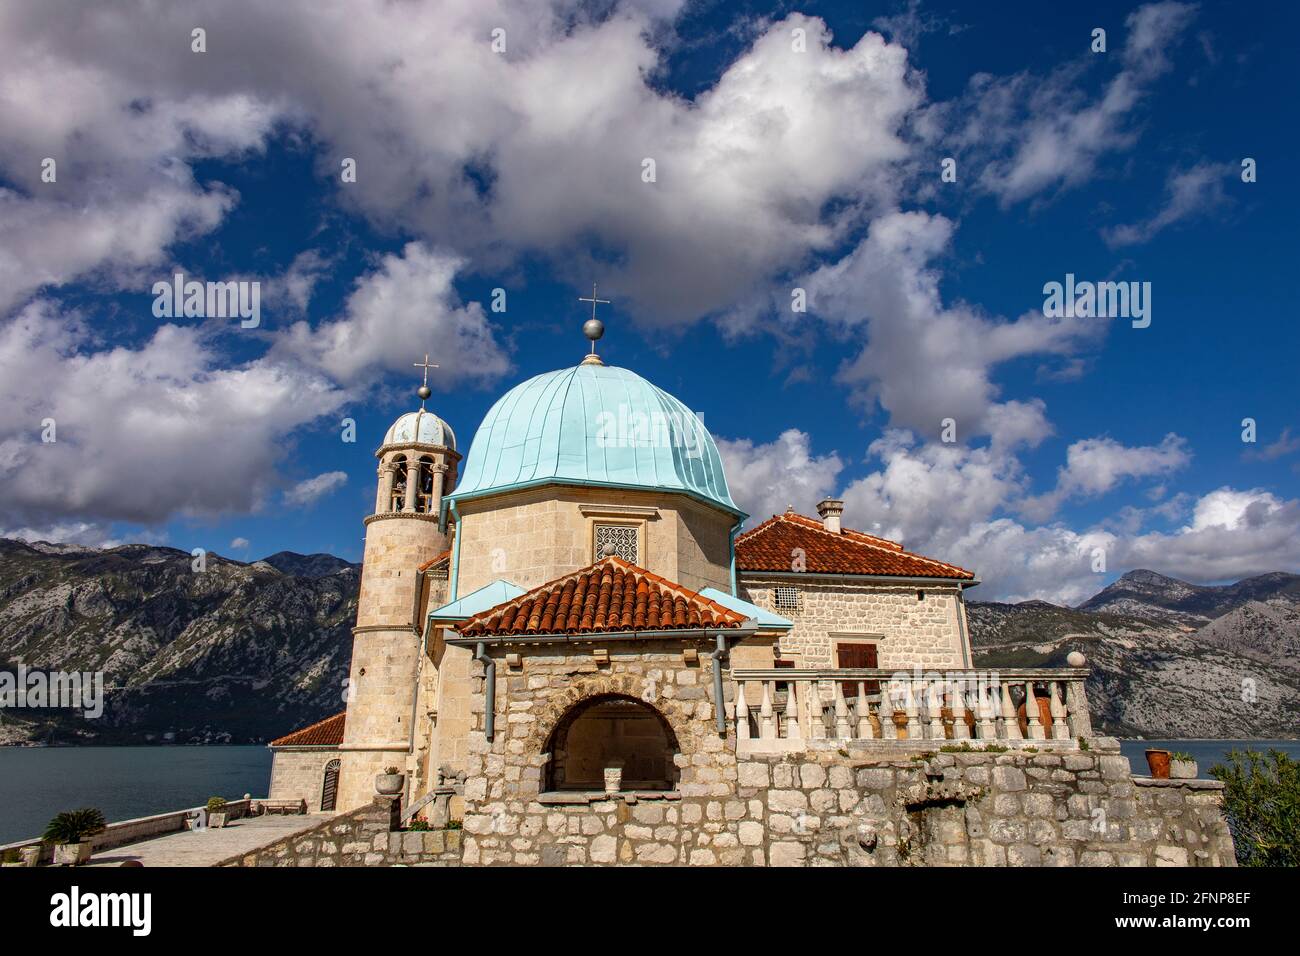 Our Lady of the Rocks church on an islet, Perast, Montenegro Stock Photo